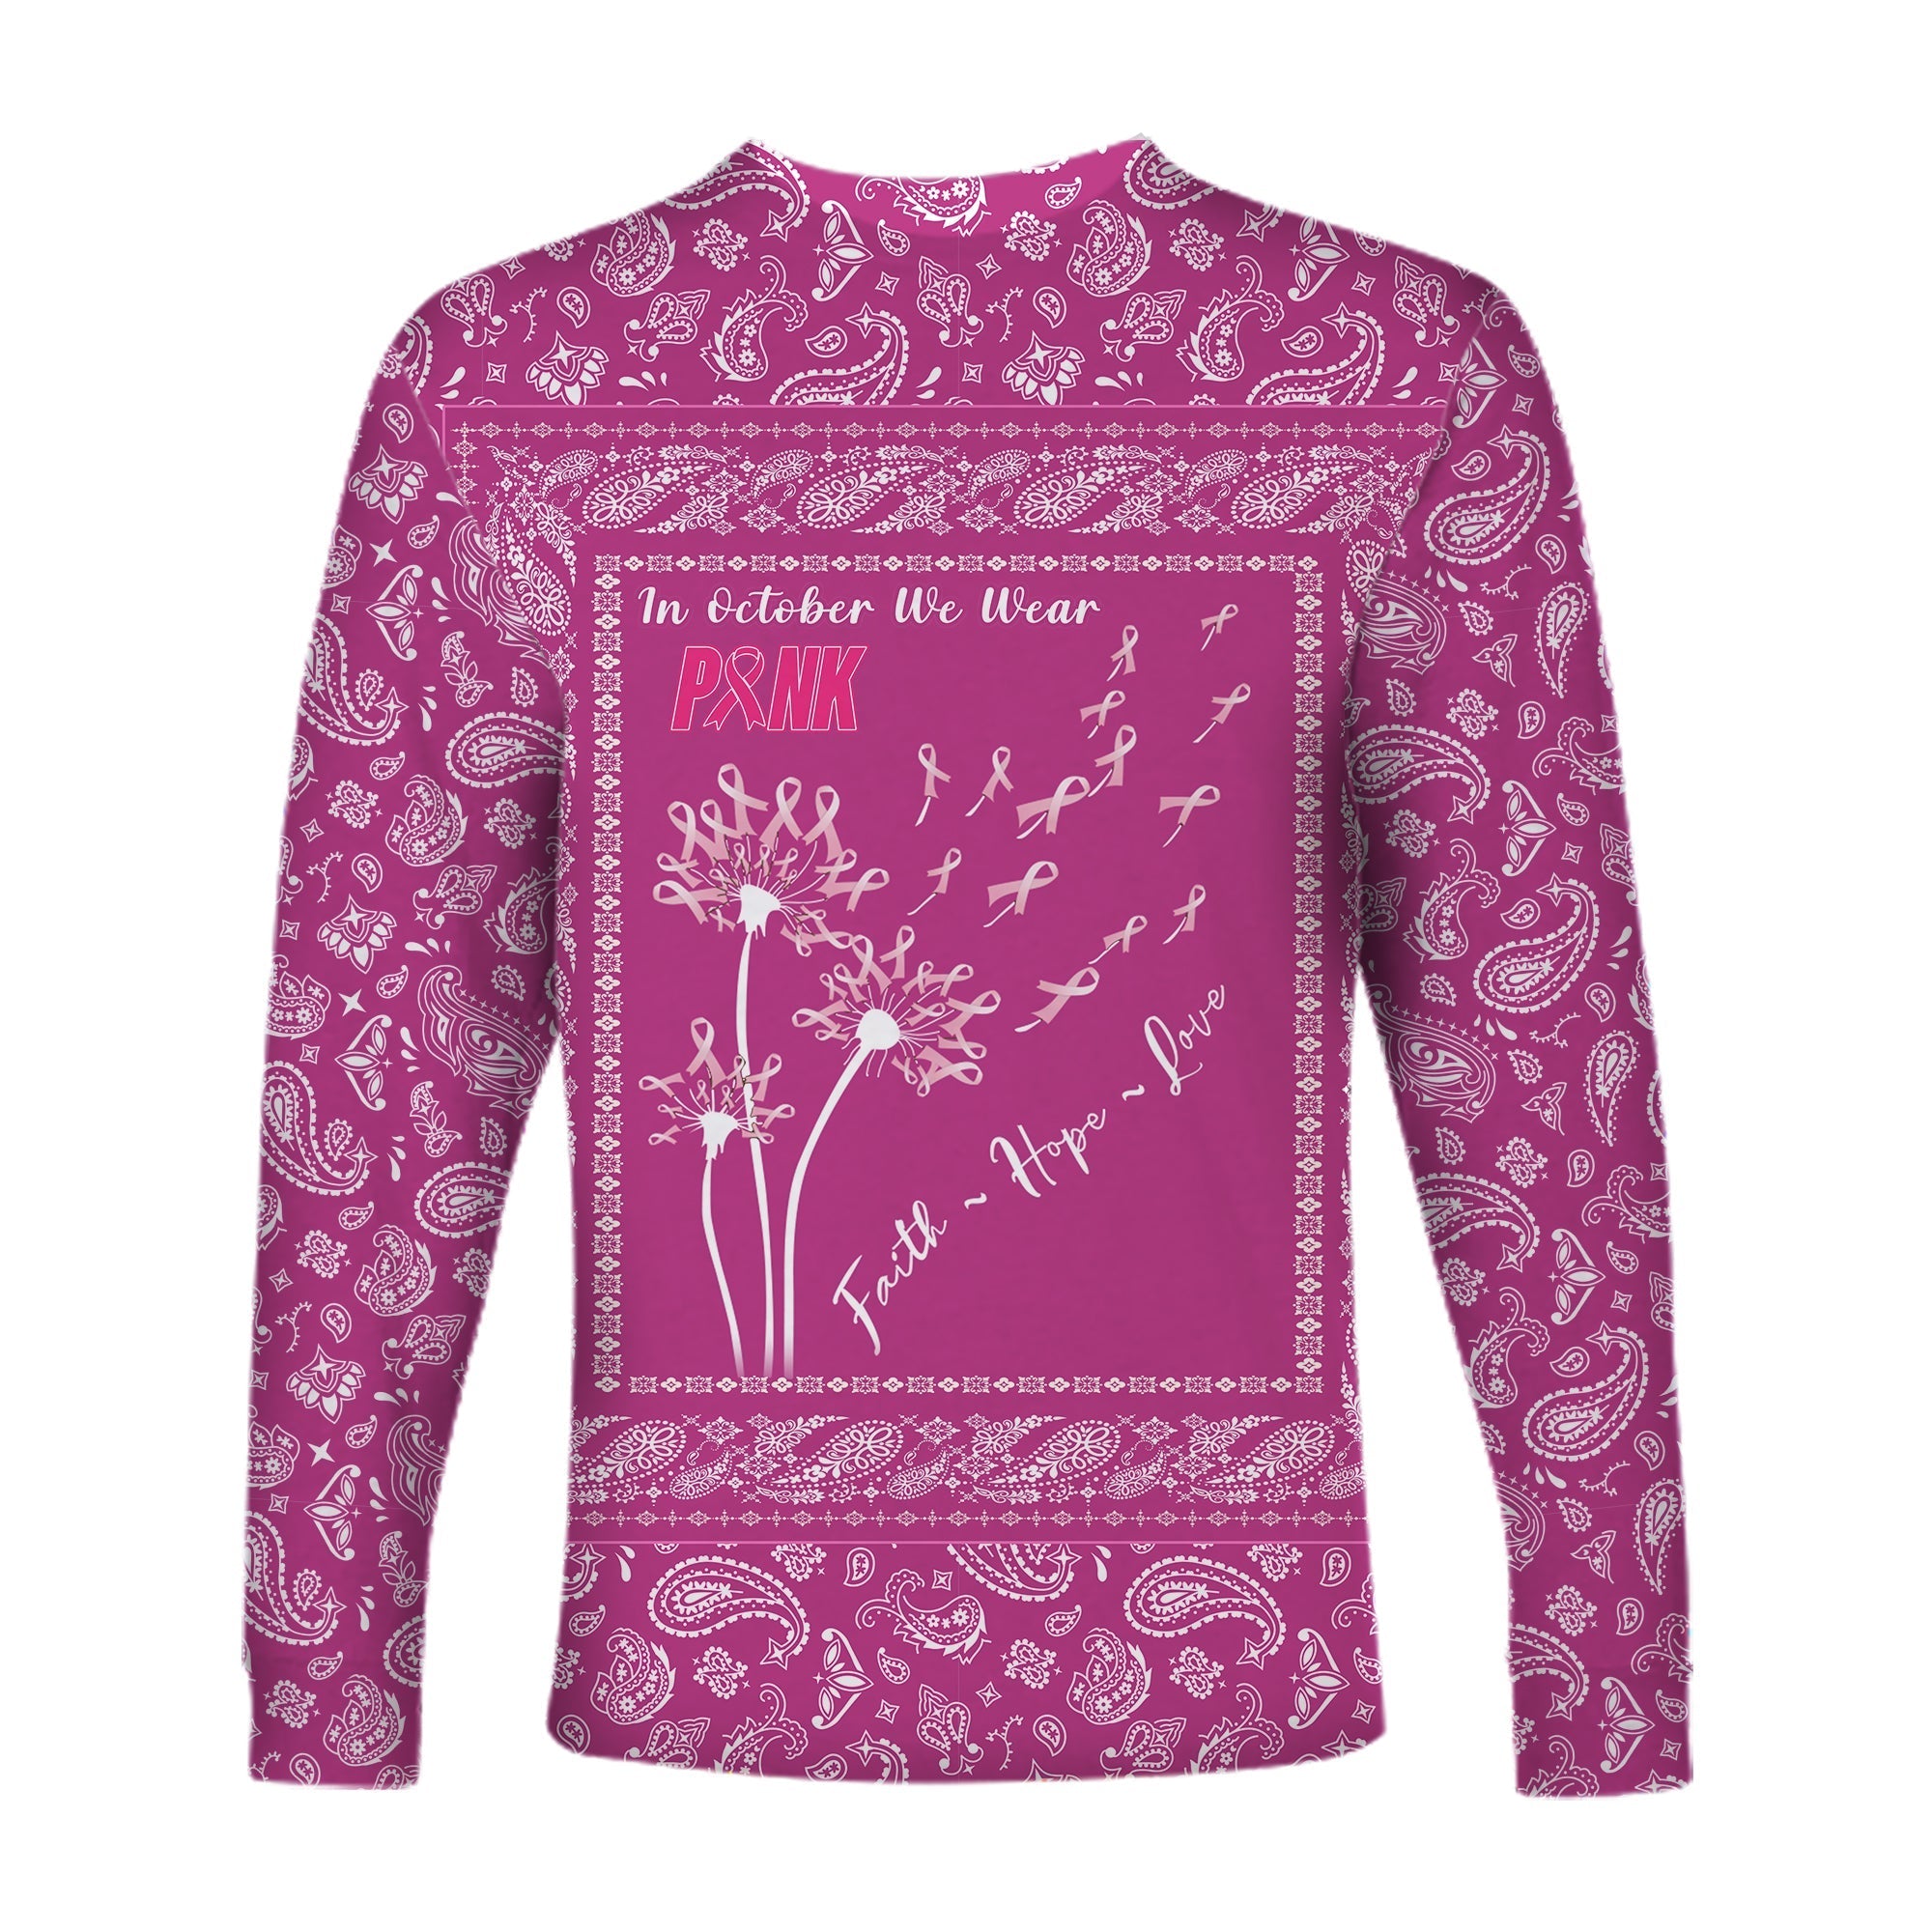 custom-personalised-breast-cancer-long-sleeve-shirt-pink-paisley-pattern-in-october-we-wear-pink